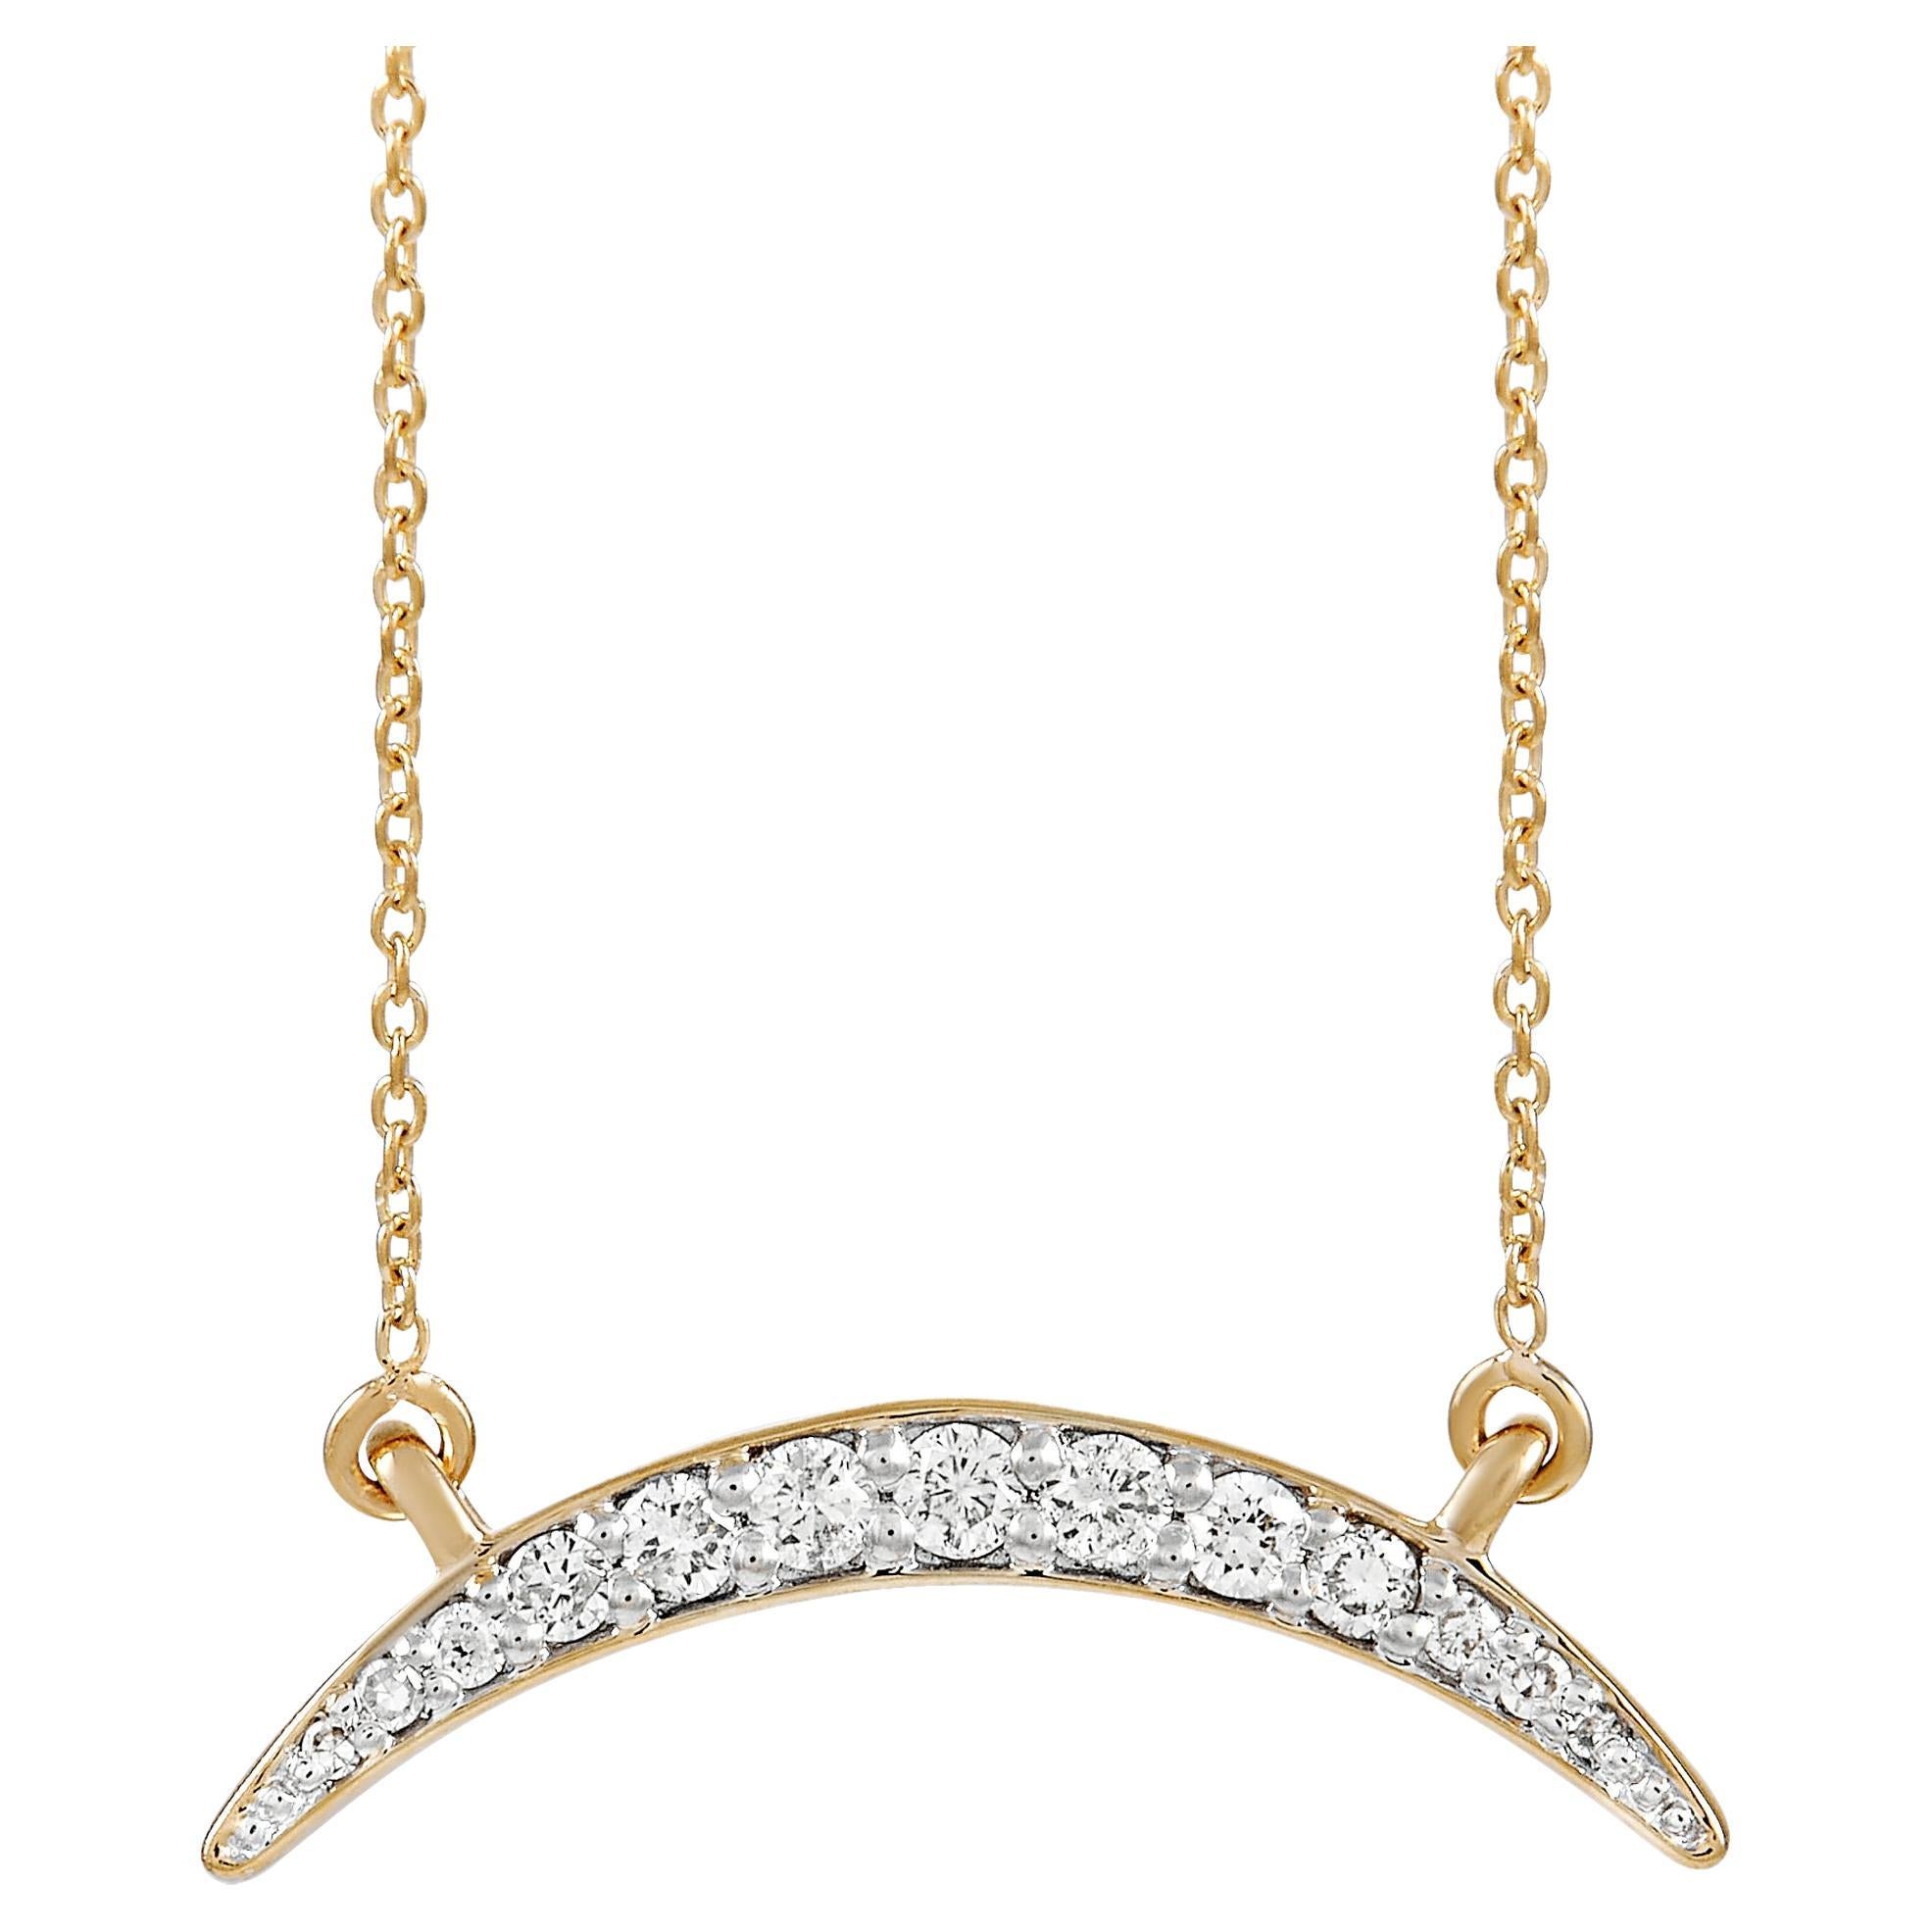 LB Exclusive 14K Yellow Gold 0.16 Ct Diamond Necklace For Sale